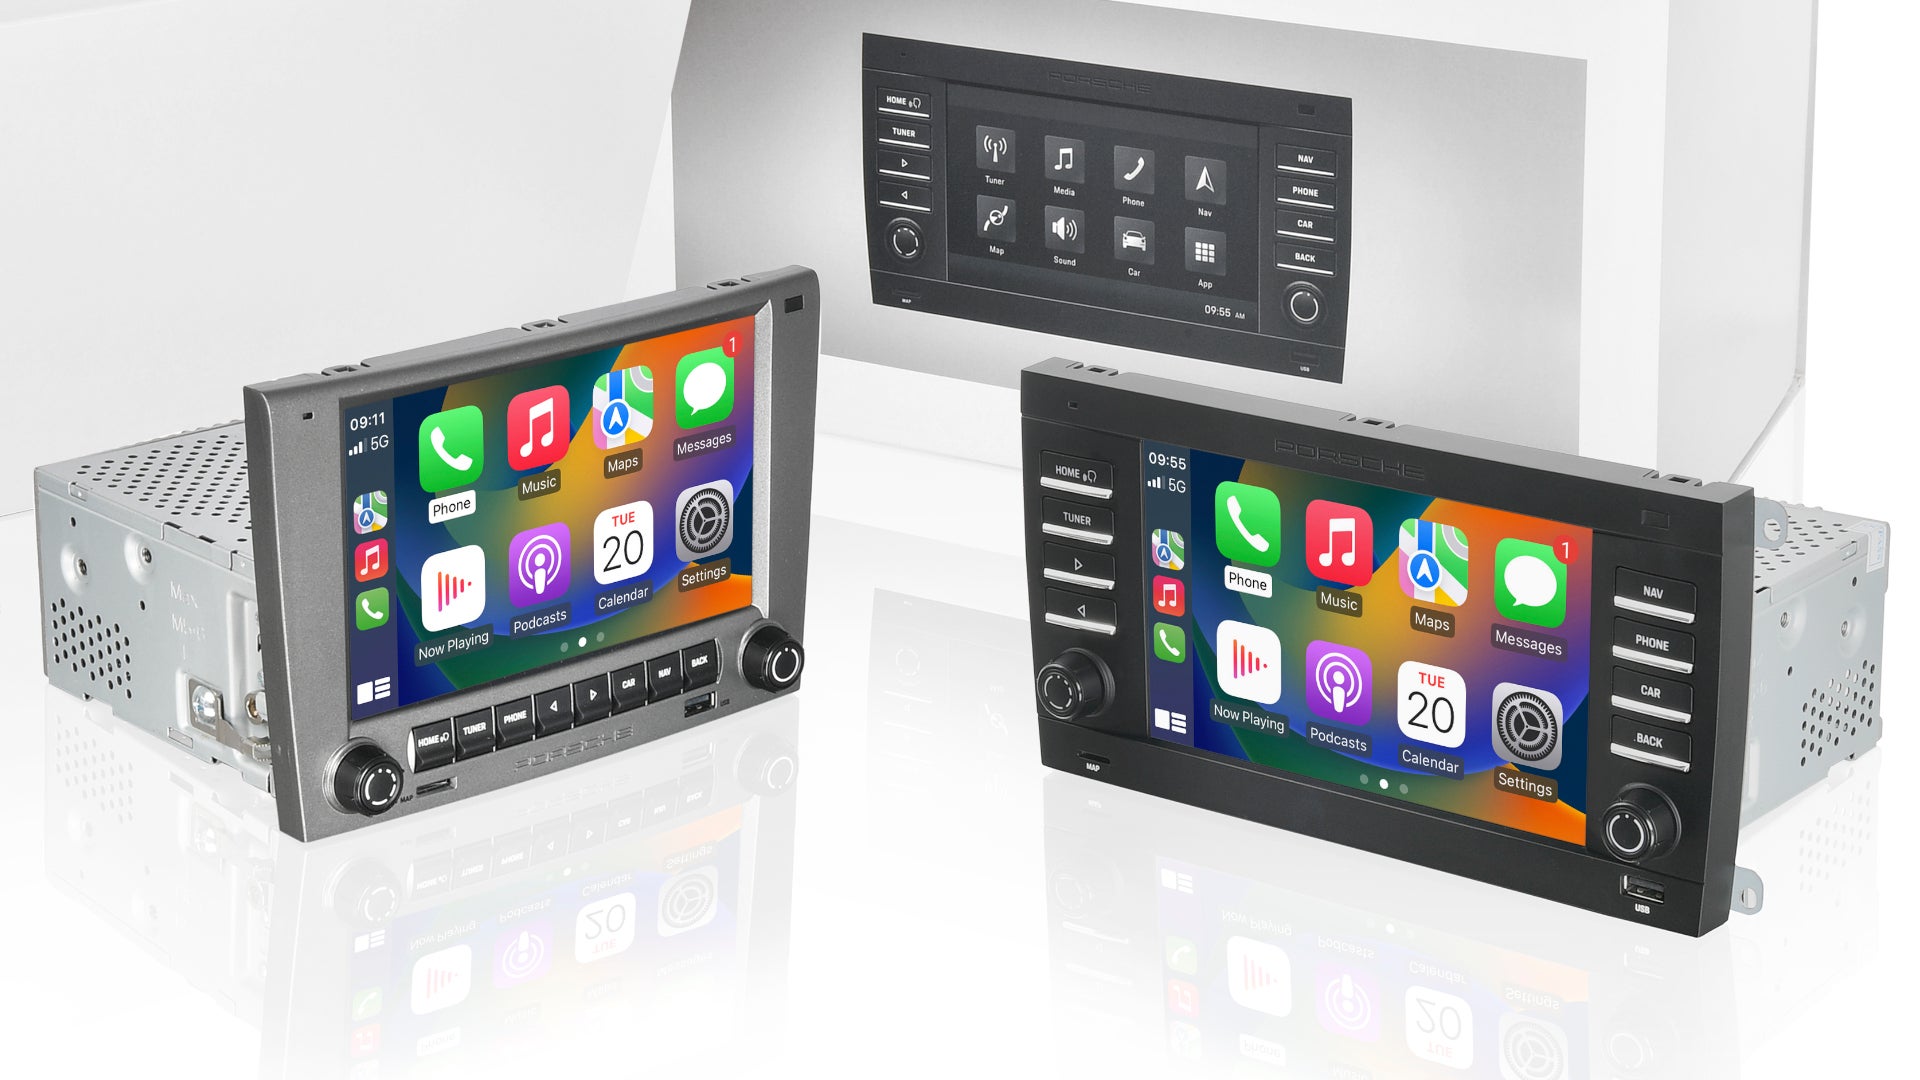 Porsche Releases New Infotainment Devices for Early 2000s Cayenne, Boxster, 911 Fashions